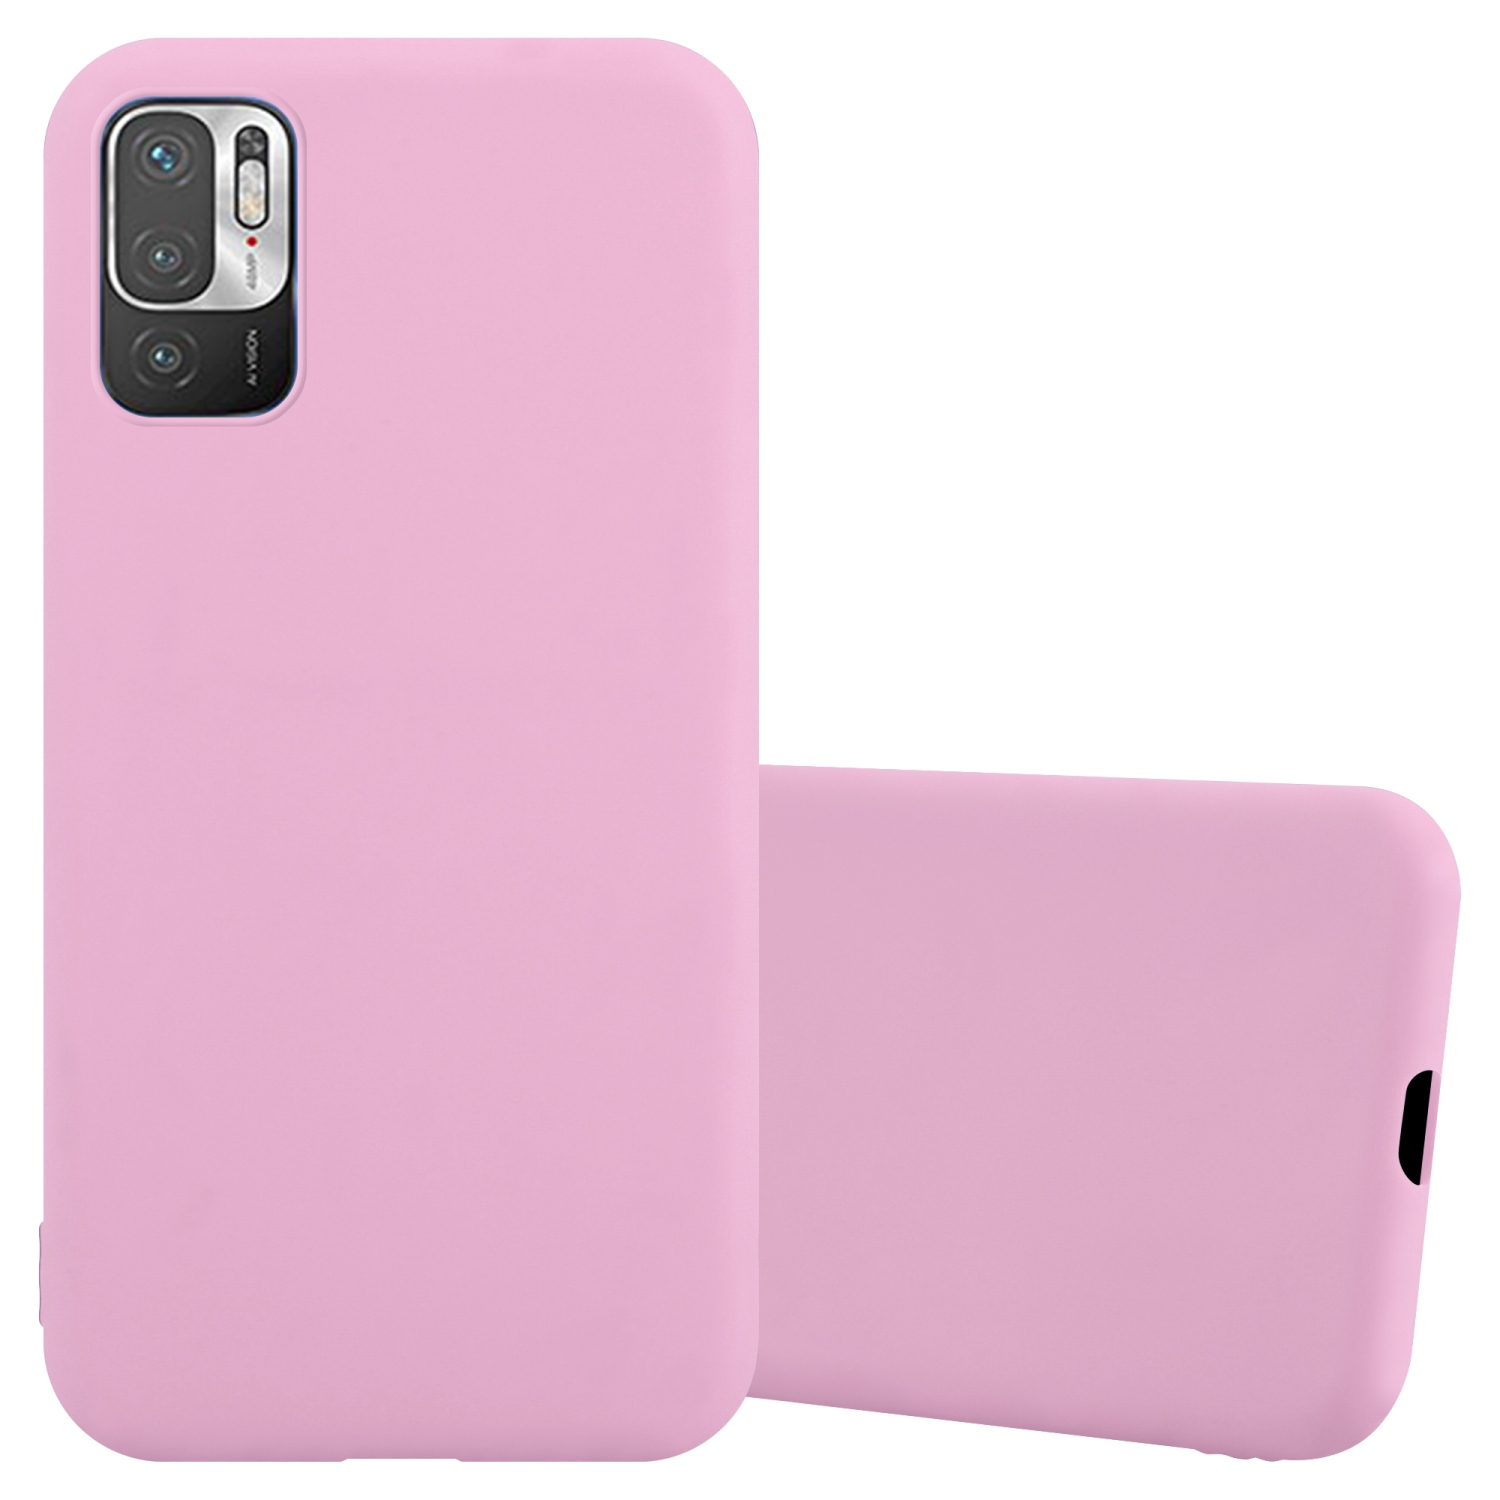 ROSA 5G, Candy 10 NOTE Backcover, CANDY POCO Hülle M3 Style, RedMi 5G Xiaomi, PRO / im TPU CADORABO